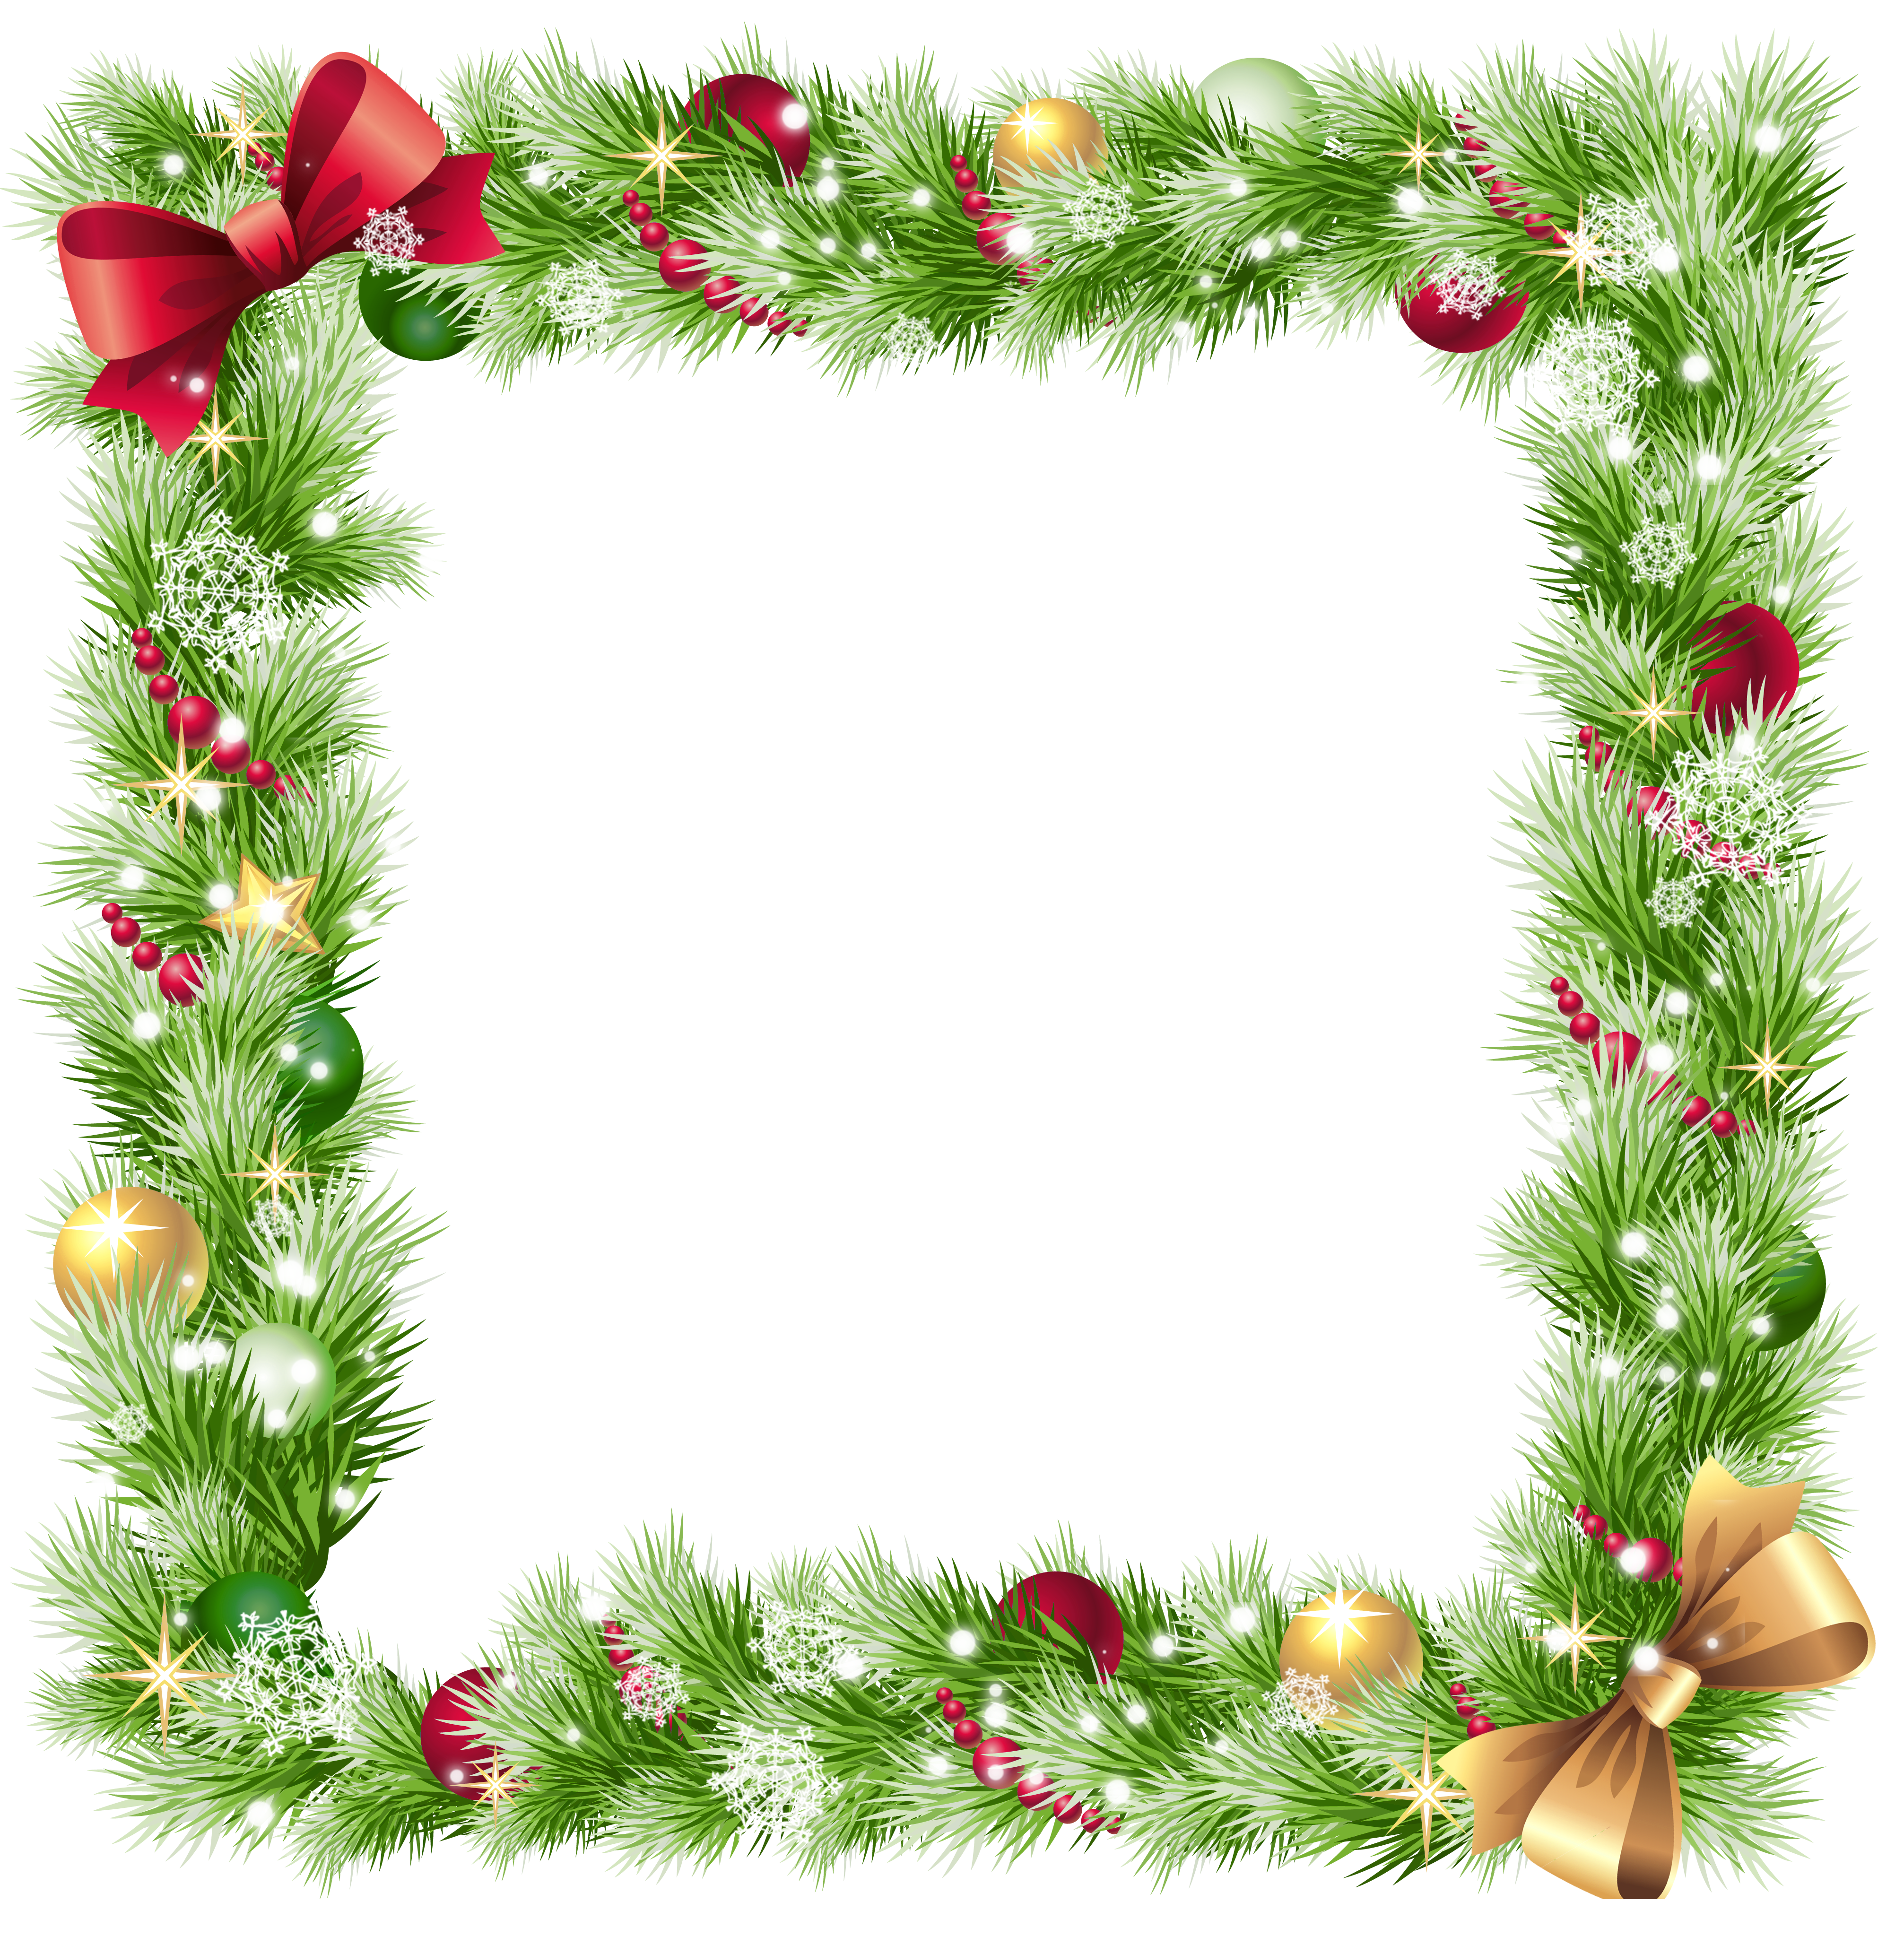 61 Awesome Christmas border clipart png for Ideas